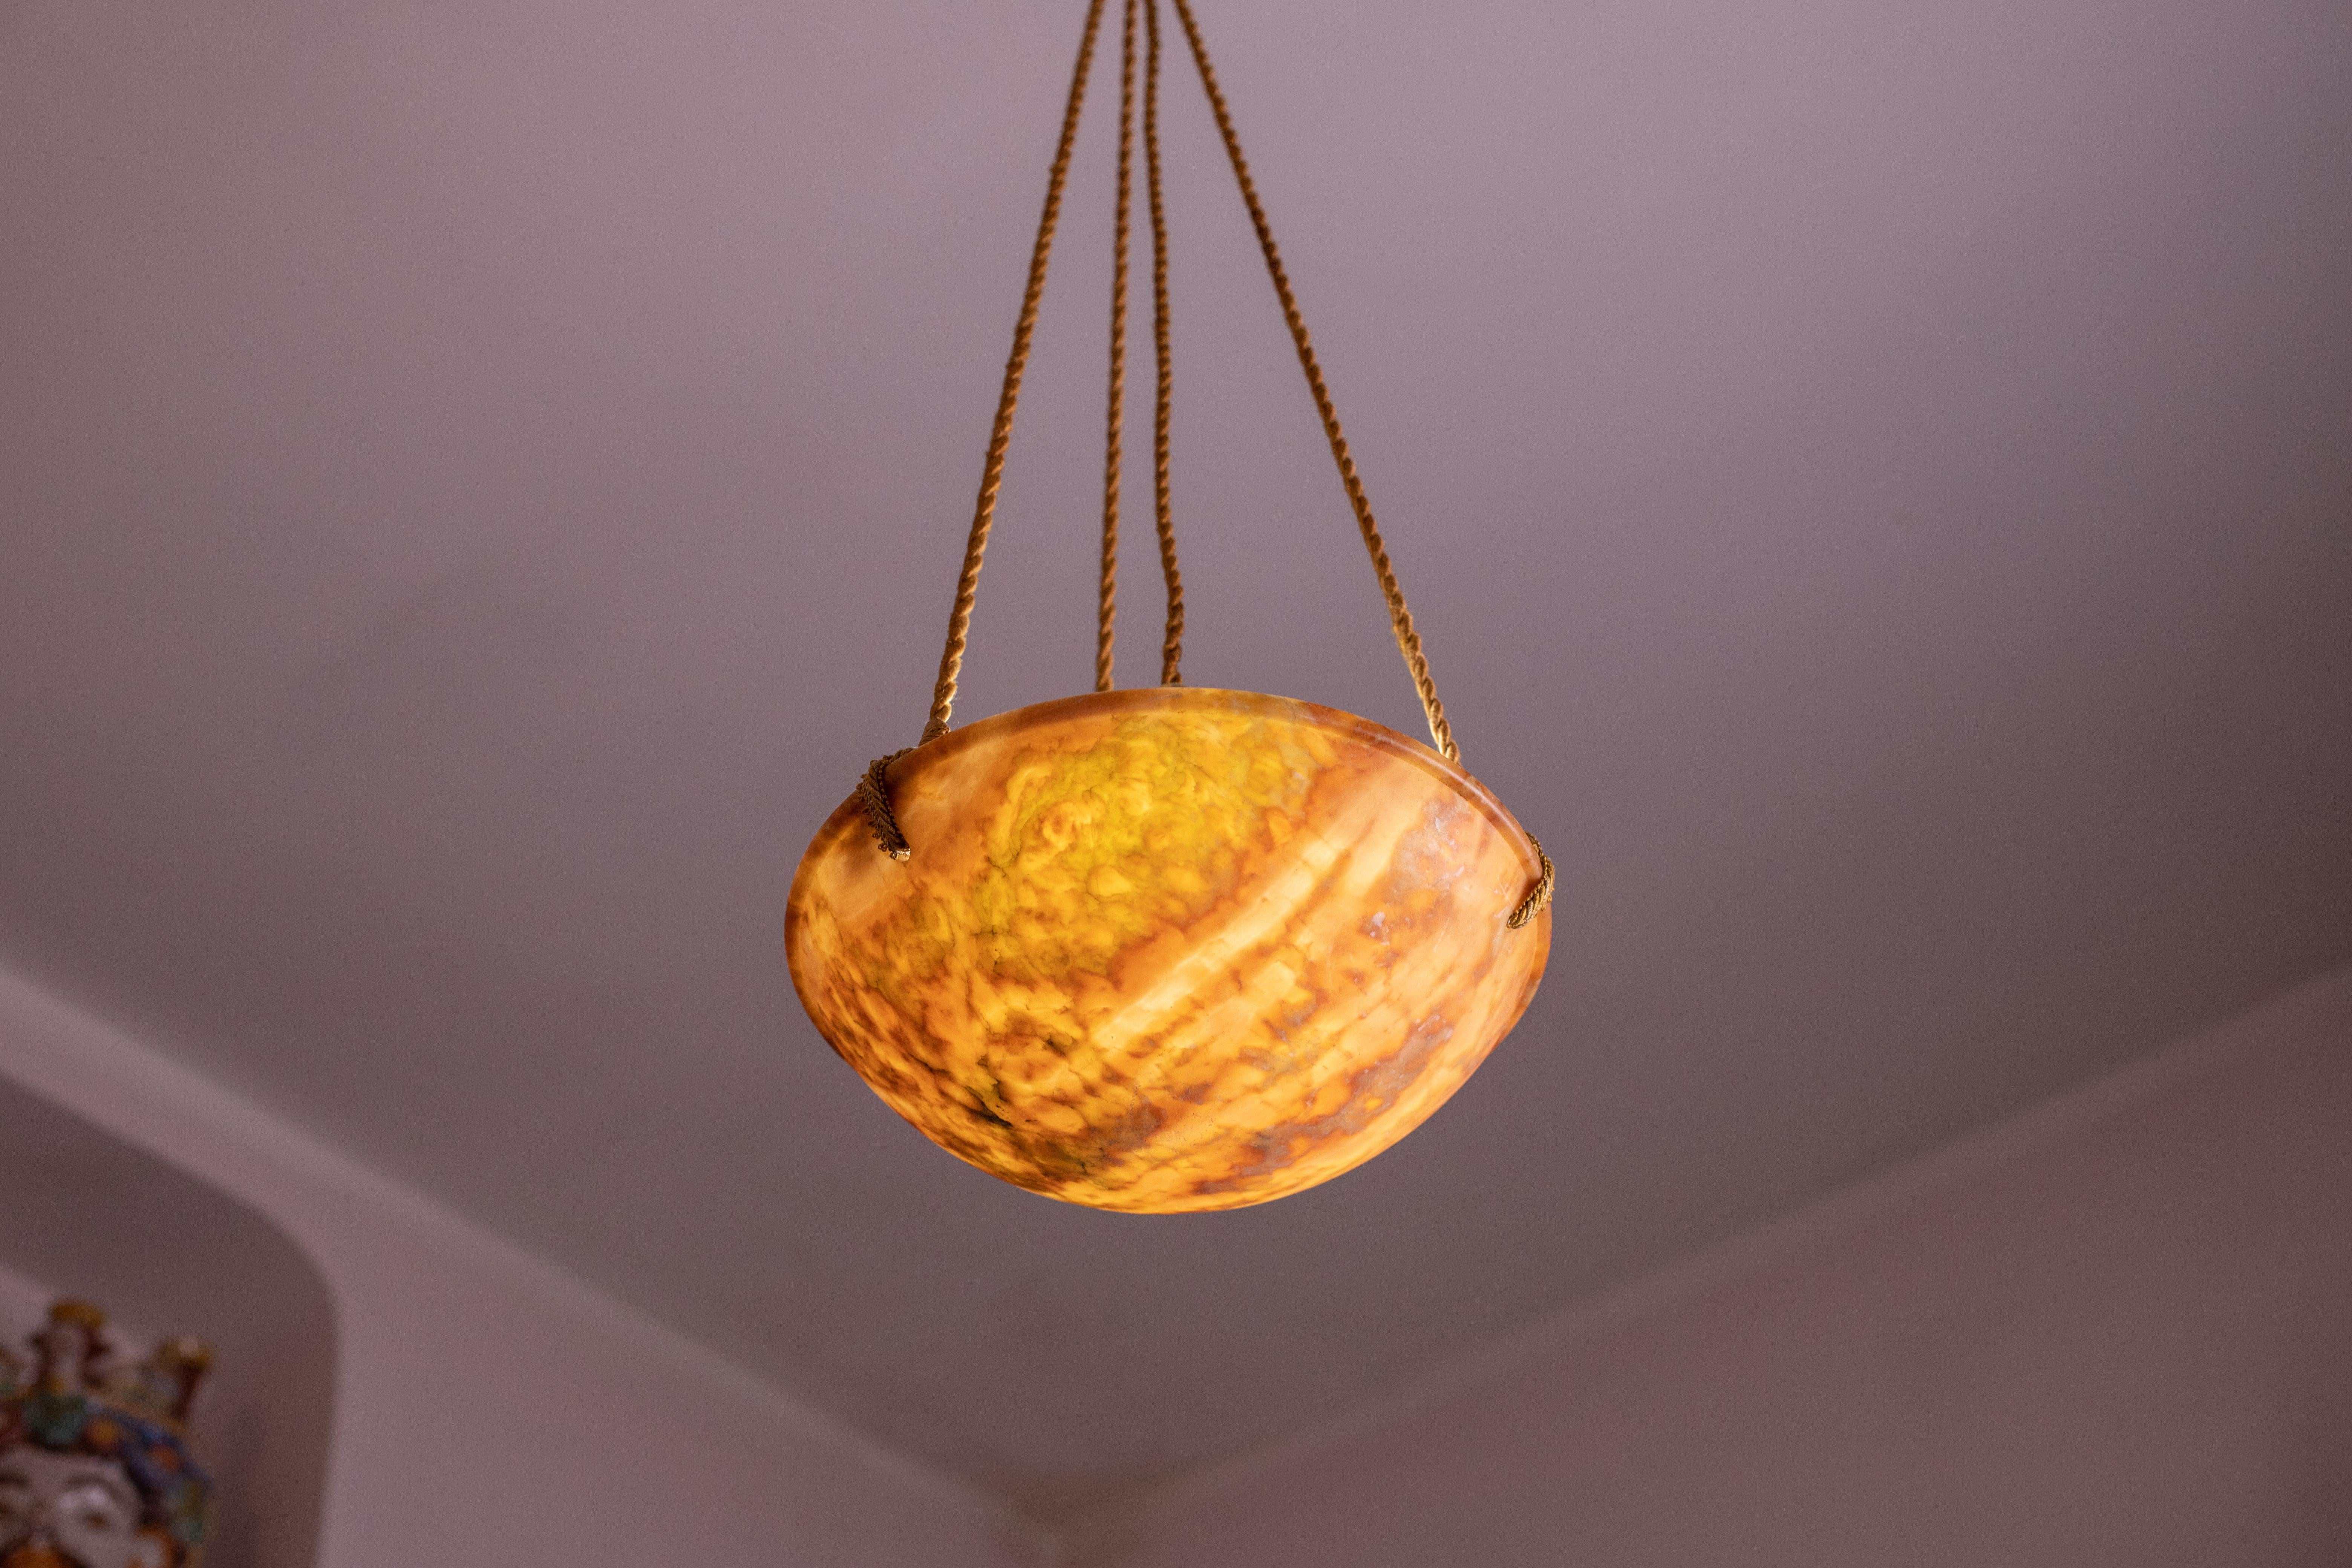 Antique Art Deco style orange alabaster hanging chandelier, circa 1950s.
A unique piece in orange alabaster, beautifully worked with shades and reflections of other colors when lit, suspended by three strings (wires). 
The light that shines through